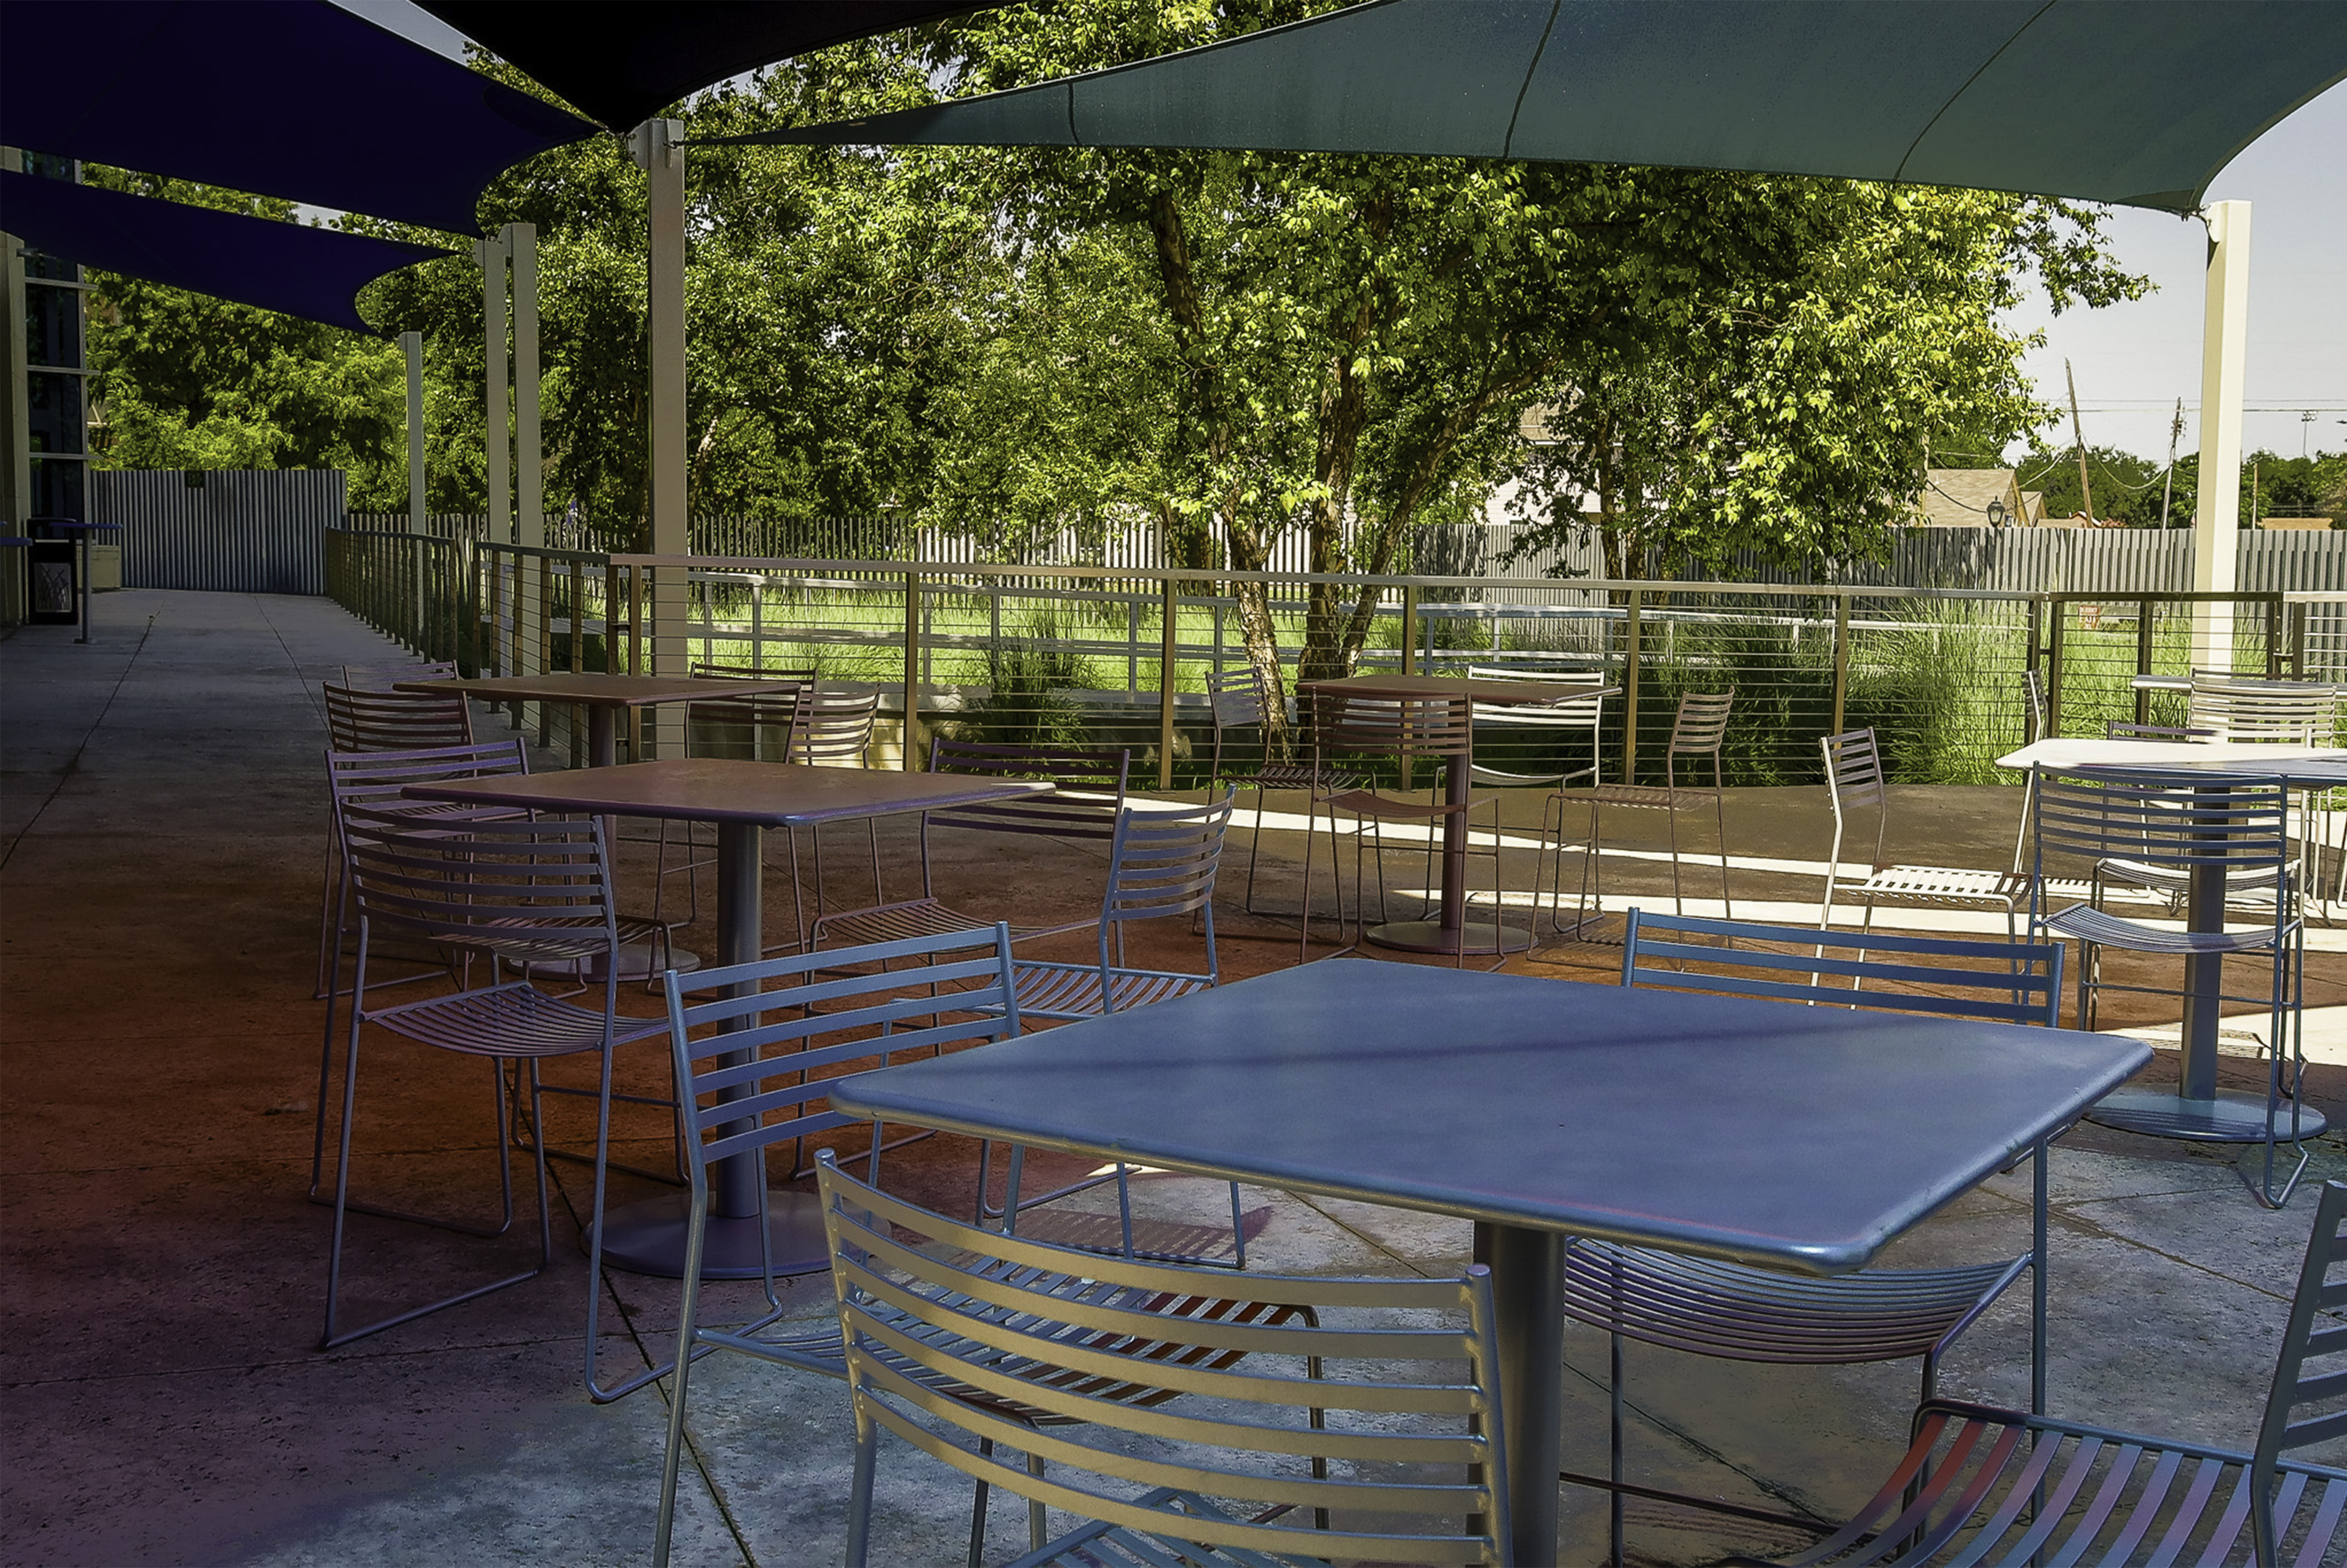 Outdoor terrace during the day. Tables and chairs set up with shade sails overhead. 